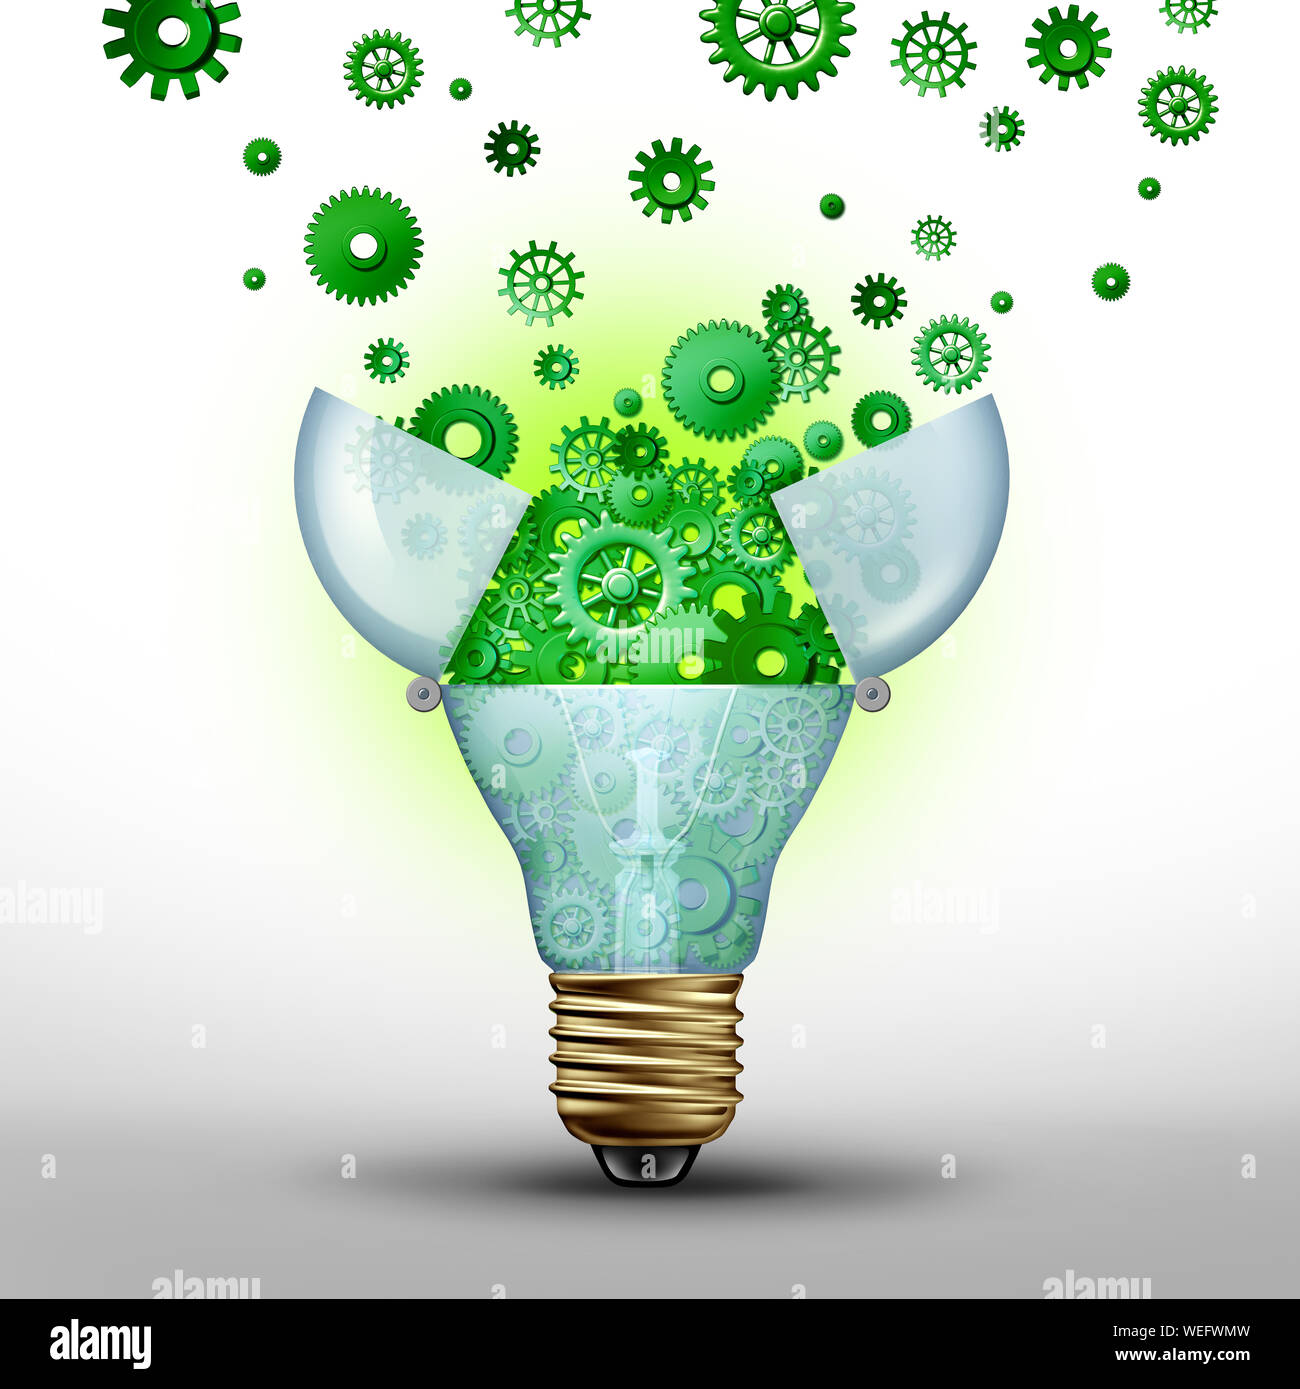 Energy efficiency concept and power savings idea as a green solution for alternative fuel as a 3D illustration. Stock Photo